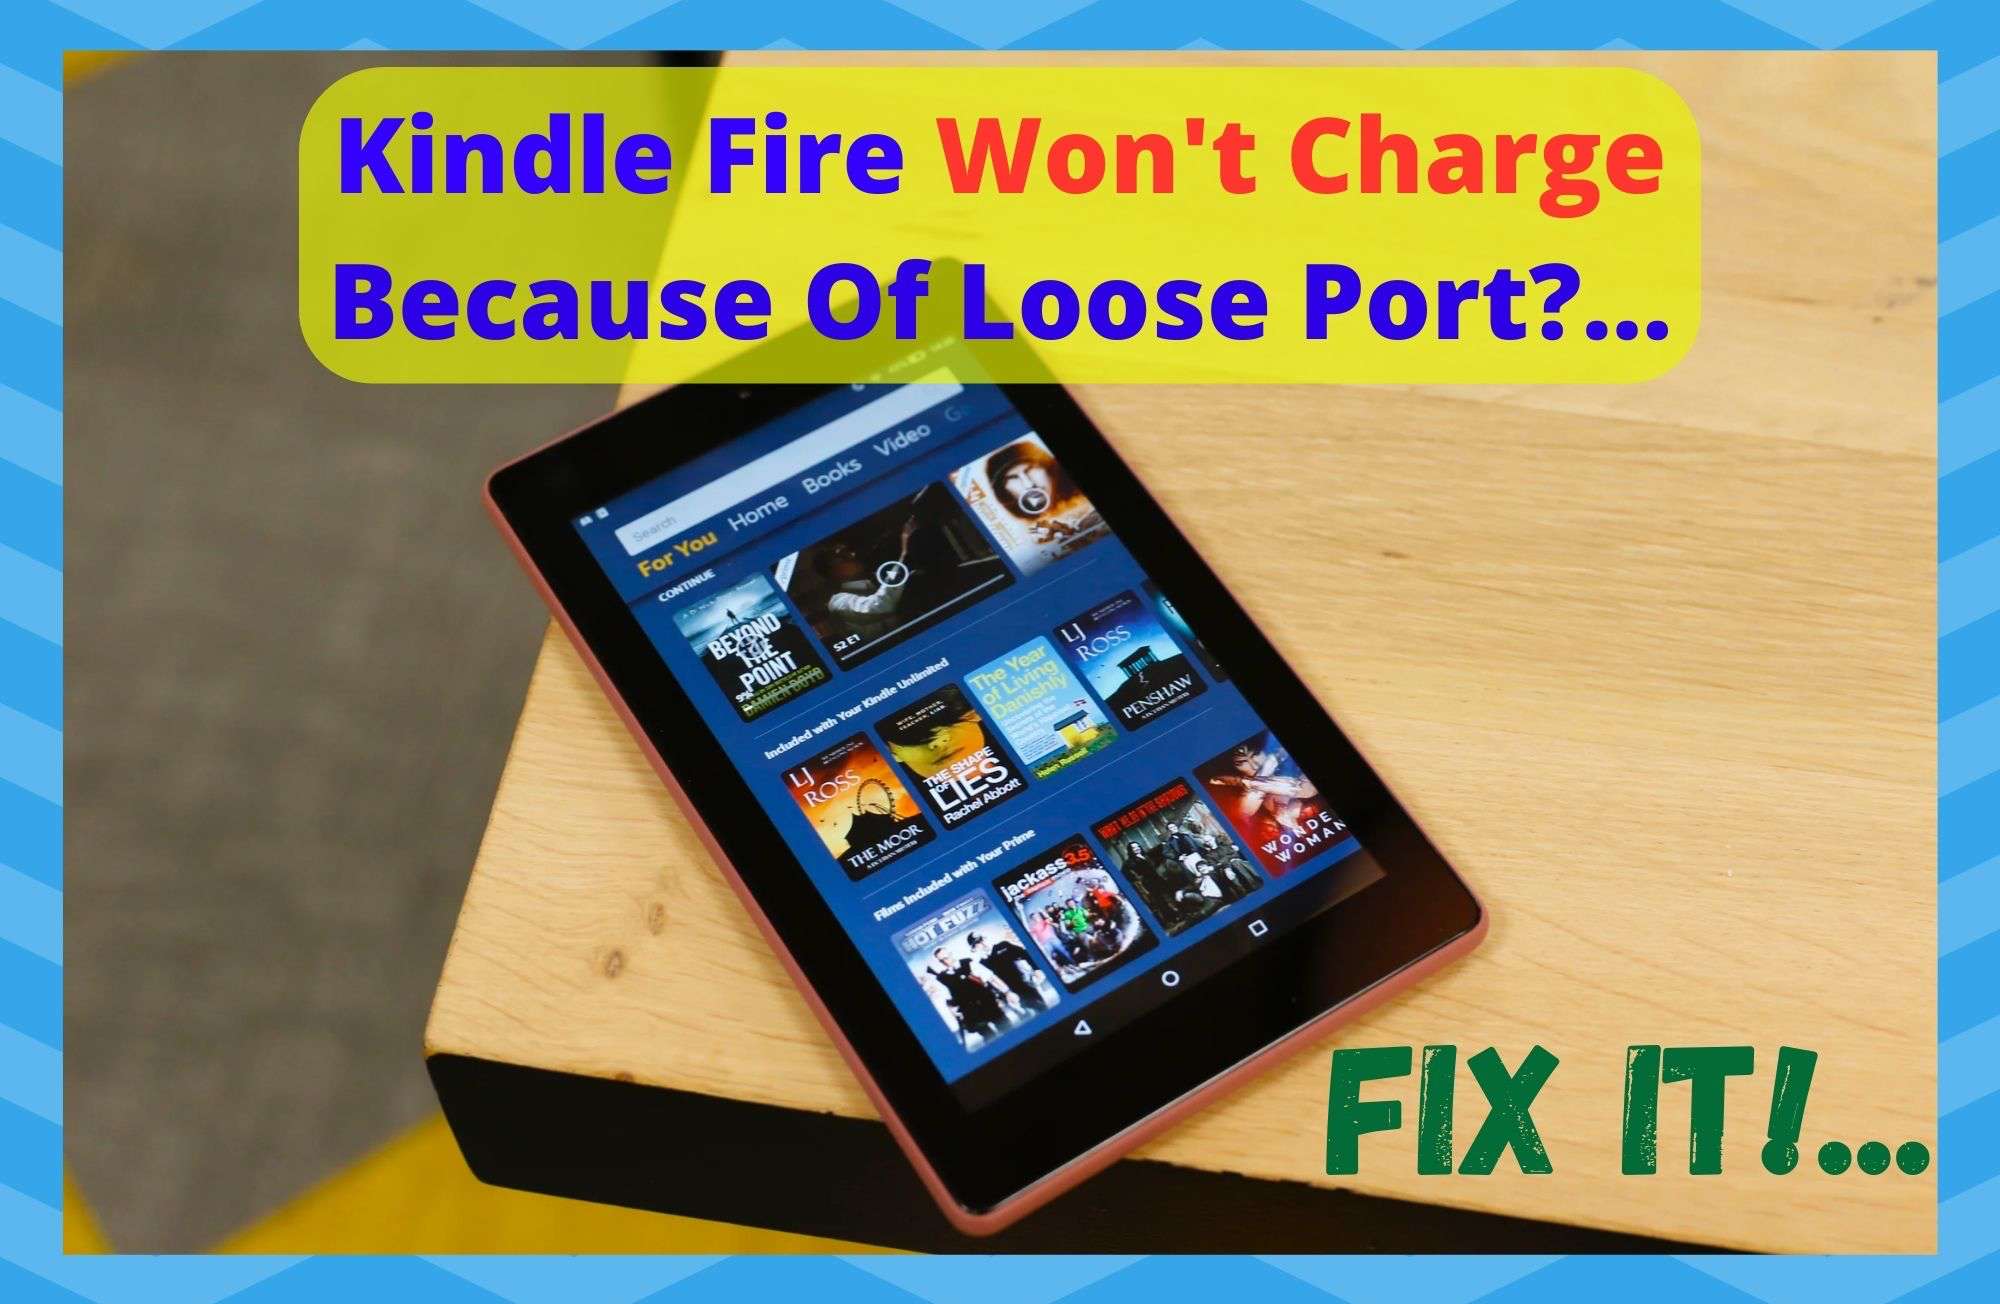 Kindle Fire Wont Charge Loose Port